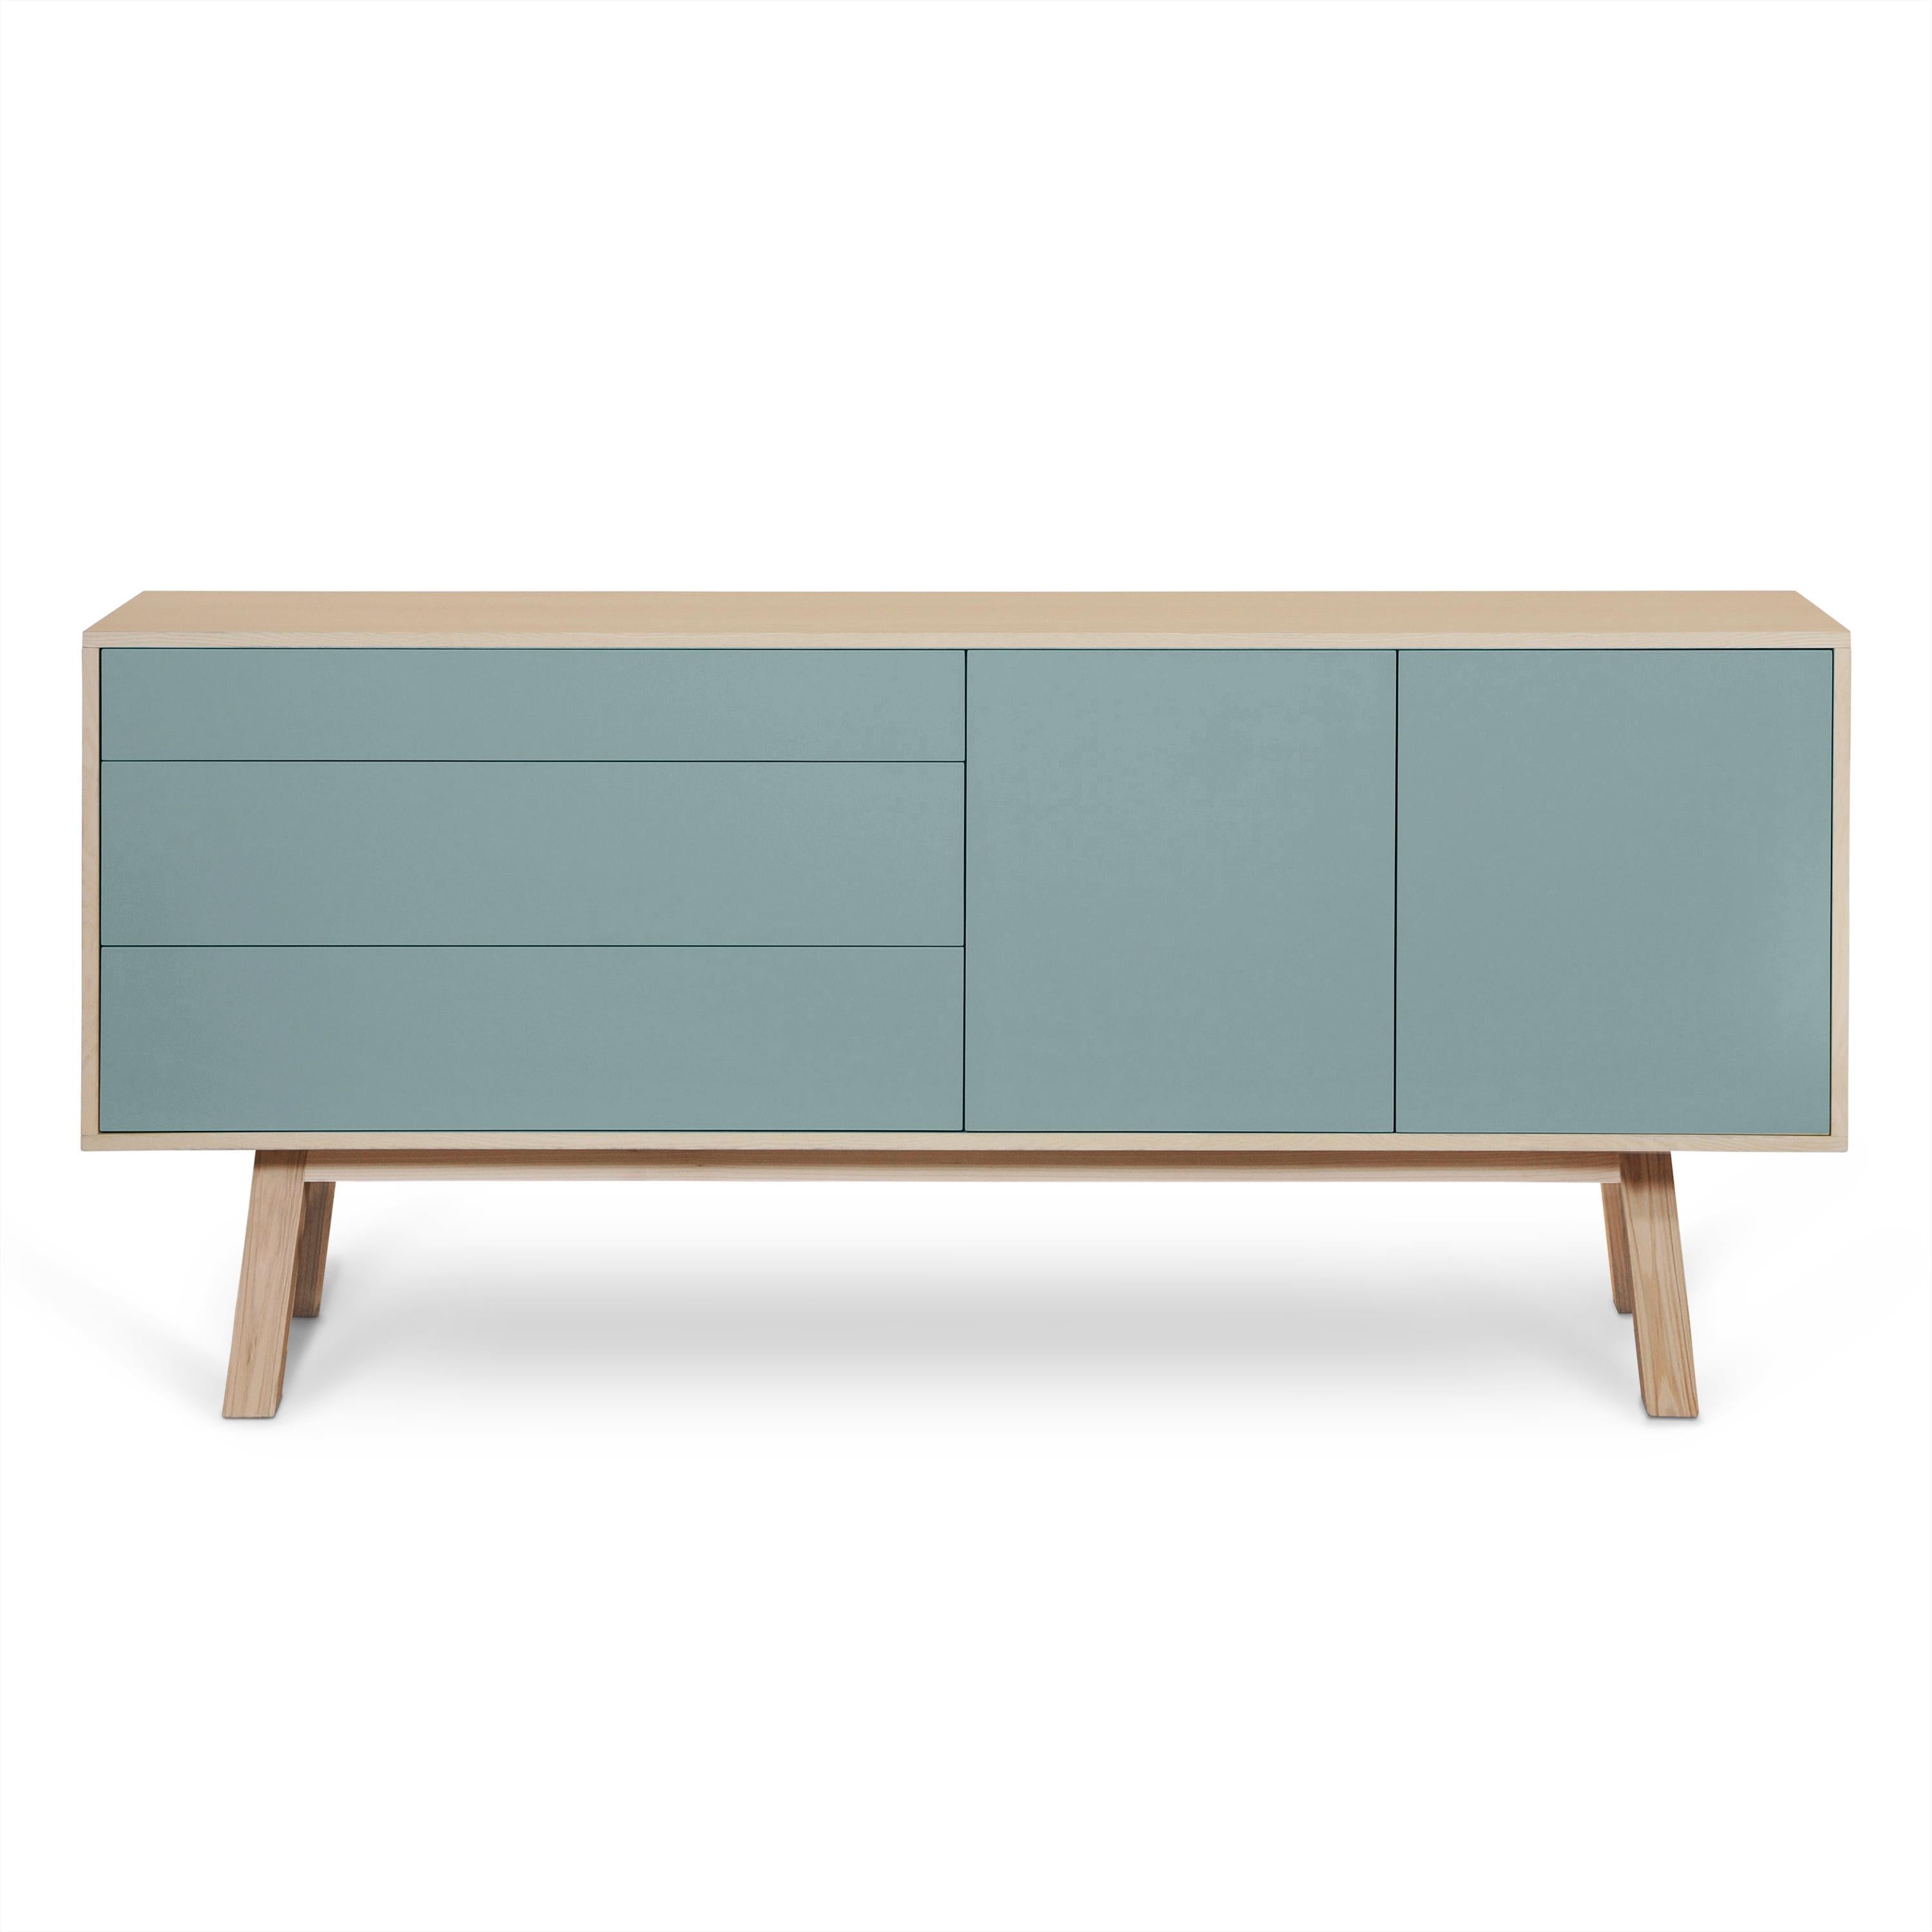 2-Door 3 Drawer High Sideboard in Ash, Design Eric Gizard, Paris Made in France For Sale 4